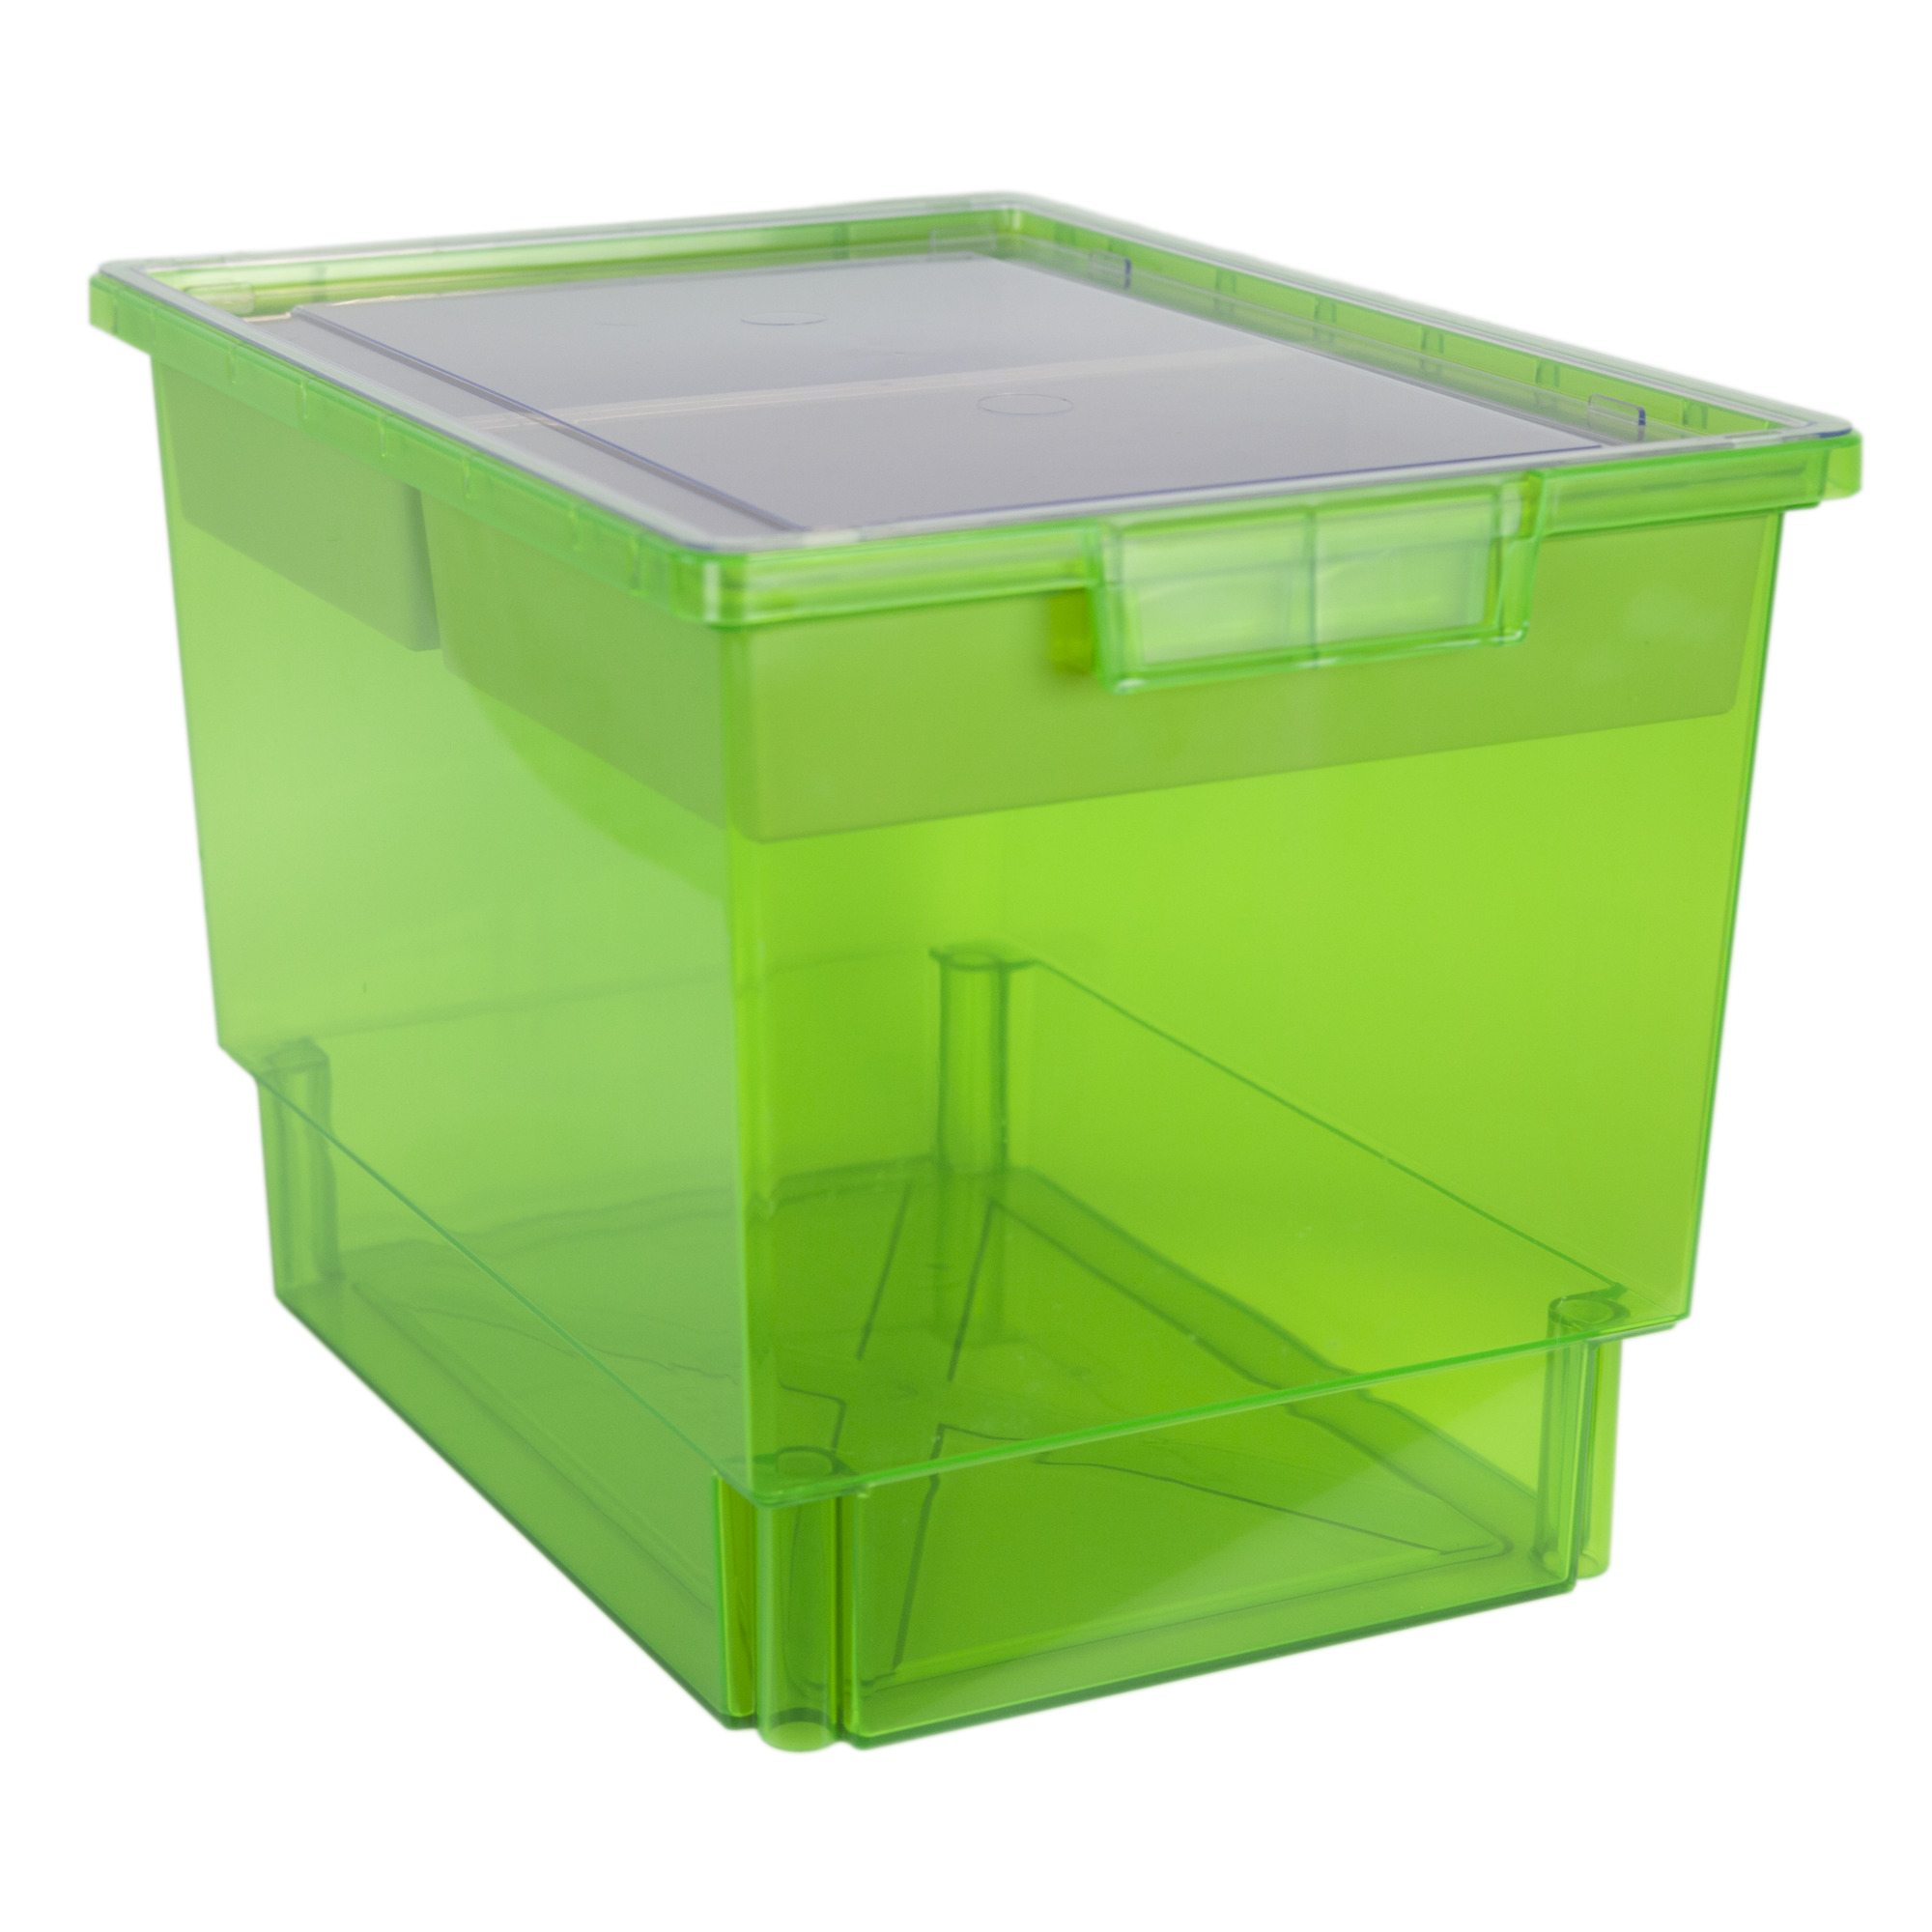 Certwood StorWerks, Slim Line 12Inch Tray Kit (2 x Divisions) Neon Green, Included (qty.) 1, Material Plastic, Height 9 in, Model CE1954FG-NK0404-1